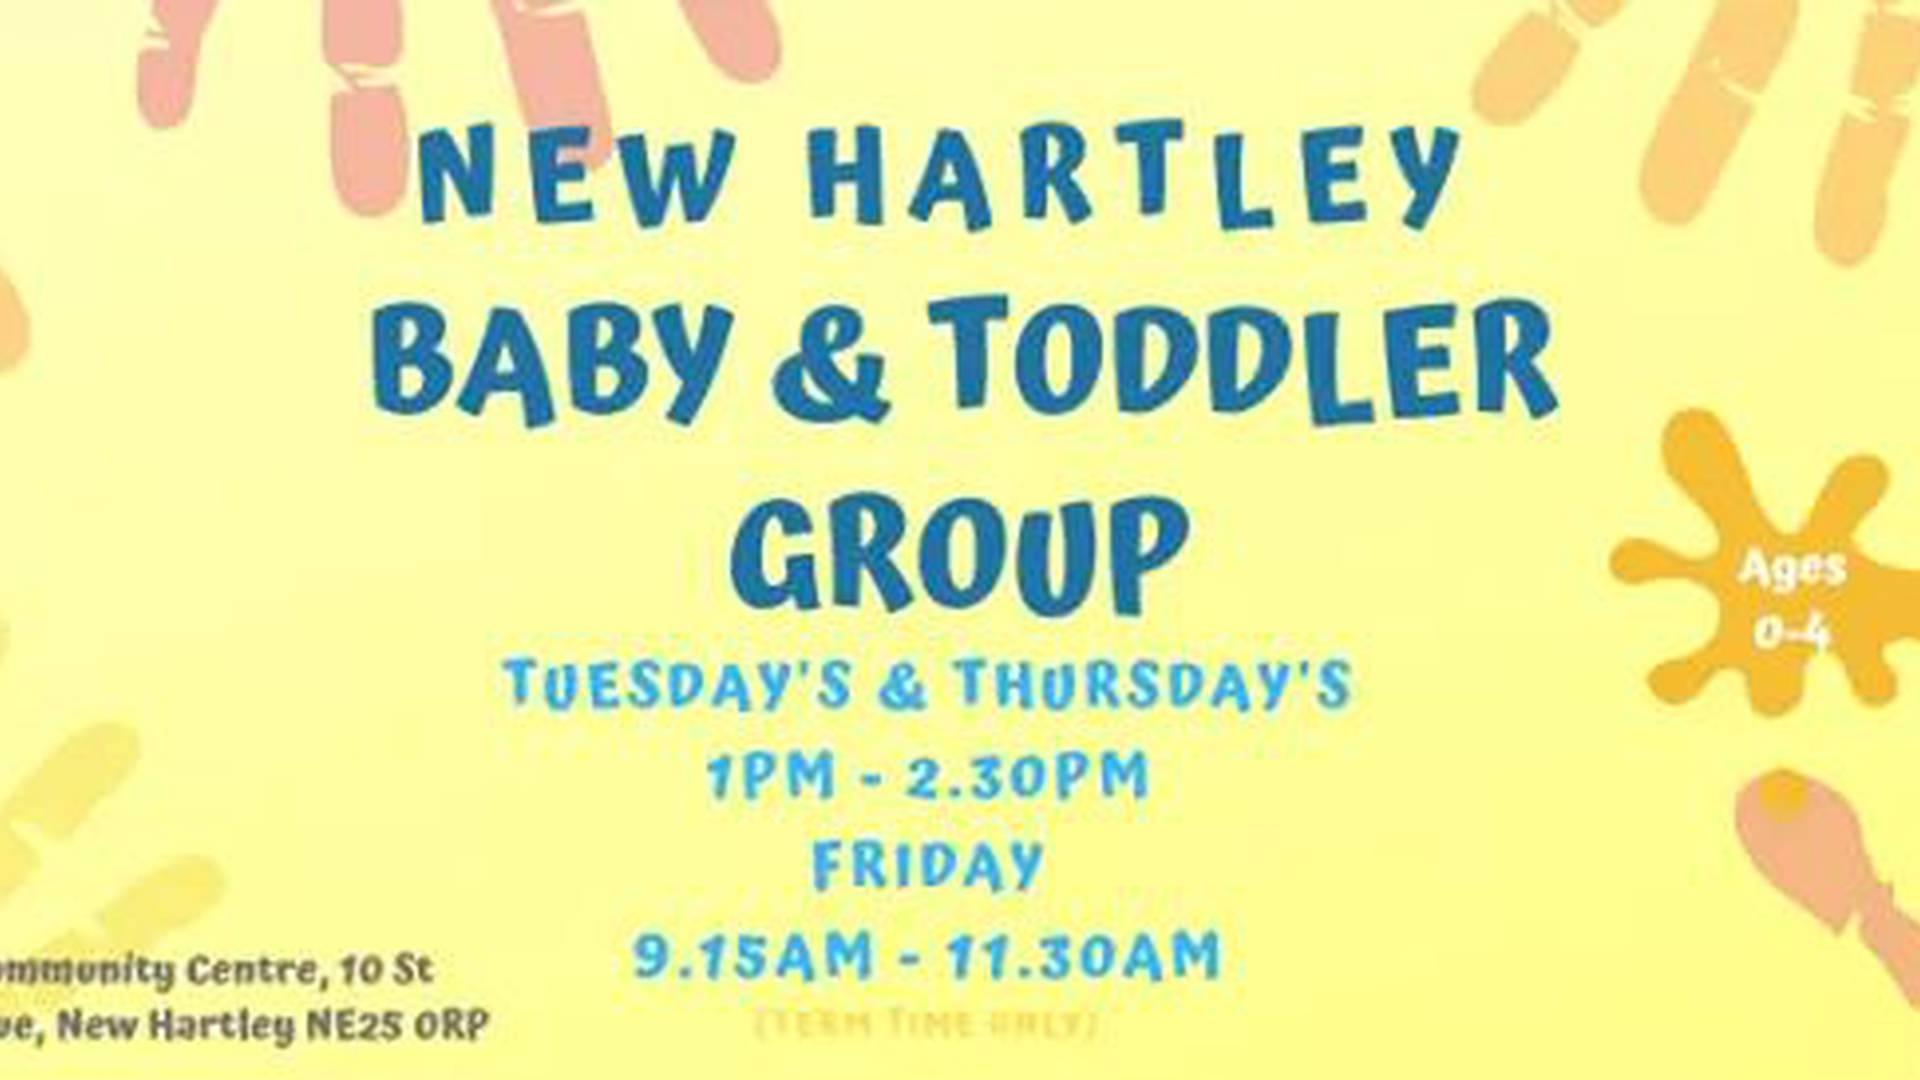 New Hartley Baby & Toddler Group photo